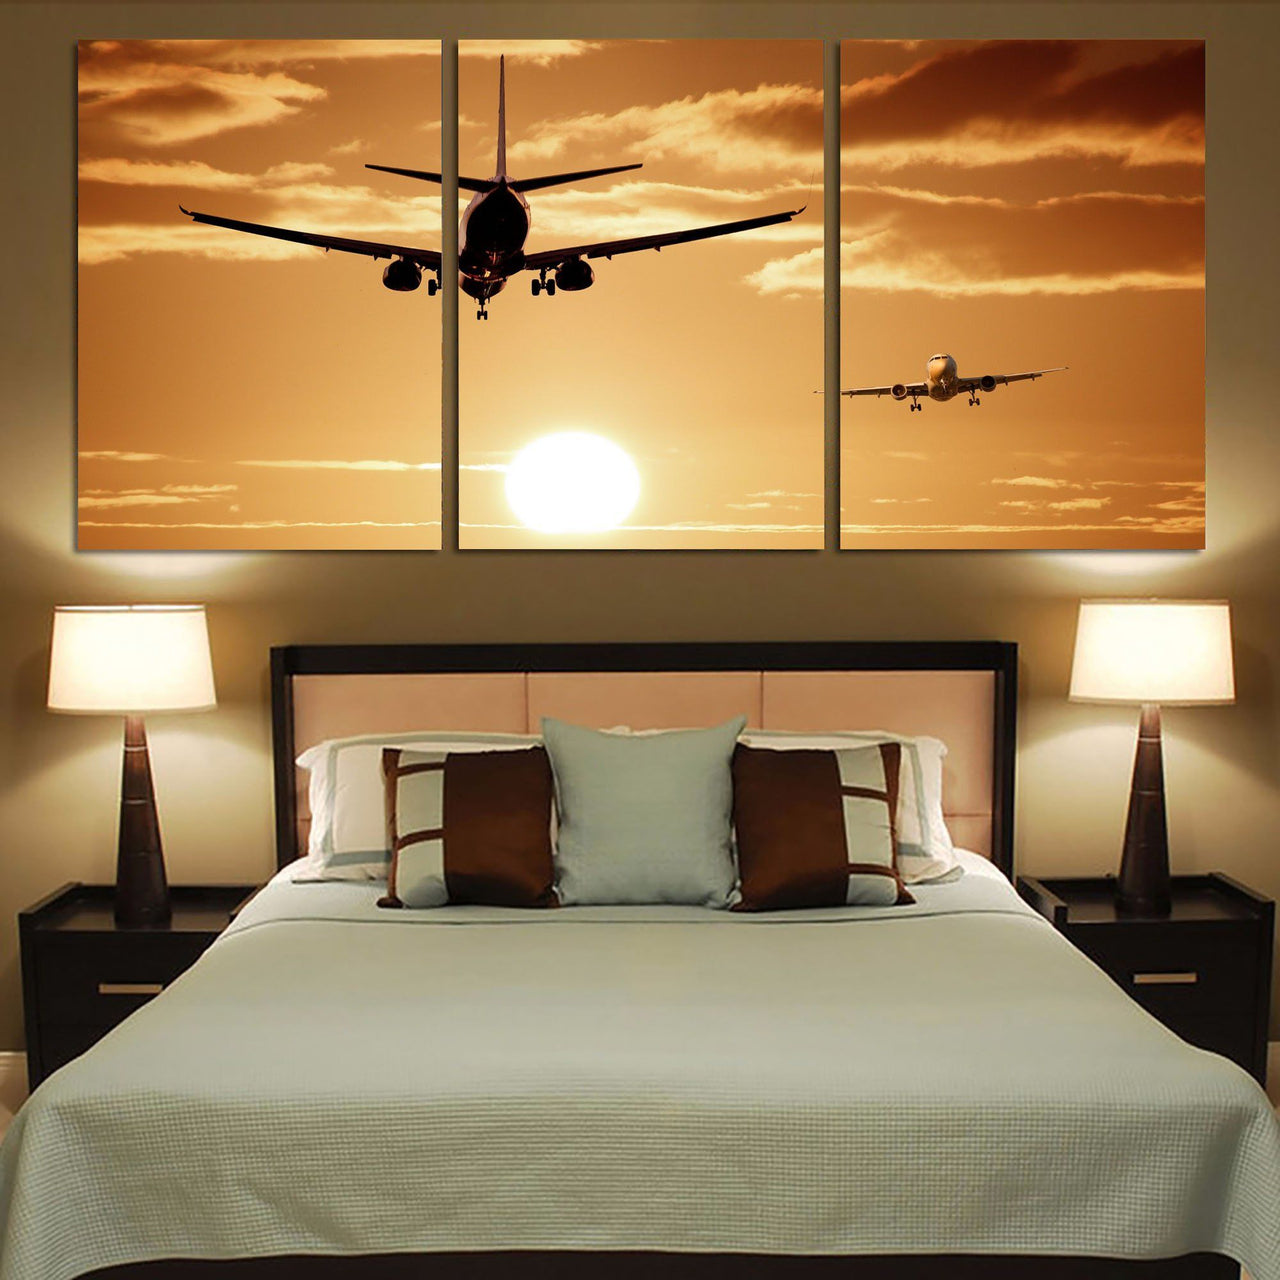 Two Aeroplanes During Sunset Printed Canvas Posters (3 Pieces) Aviation Shop 